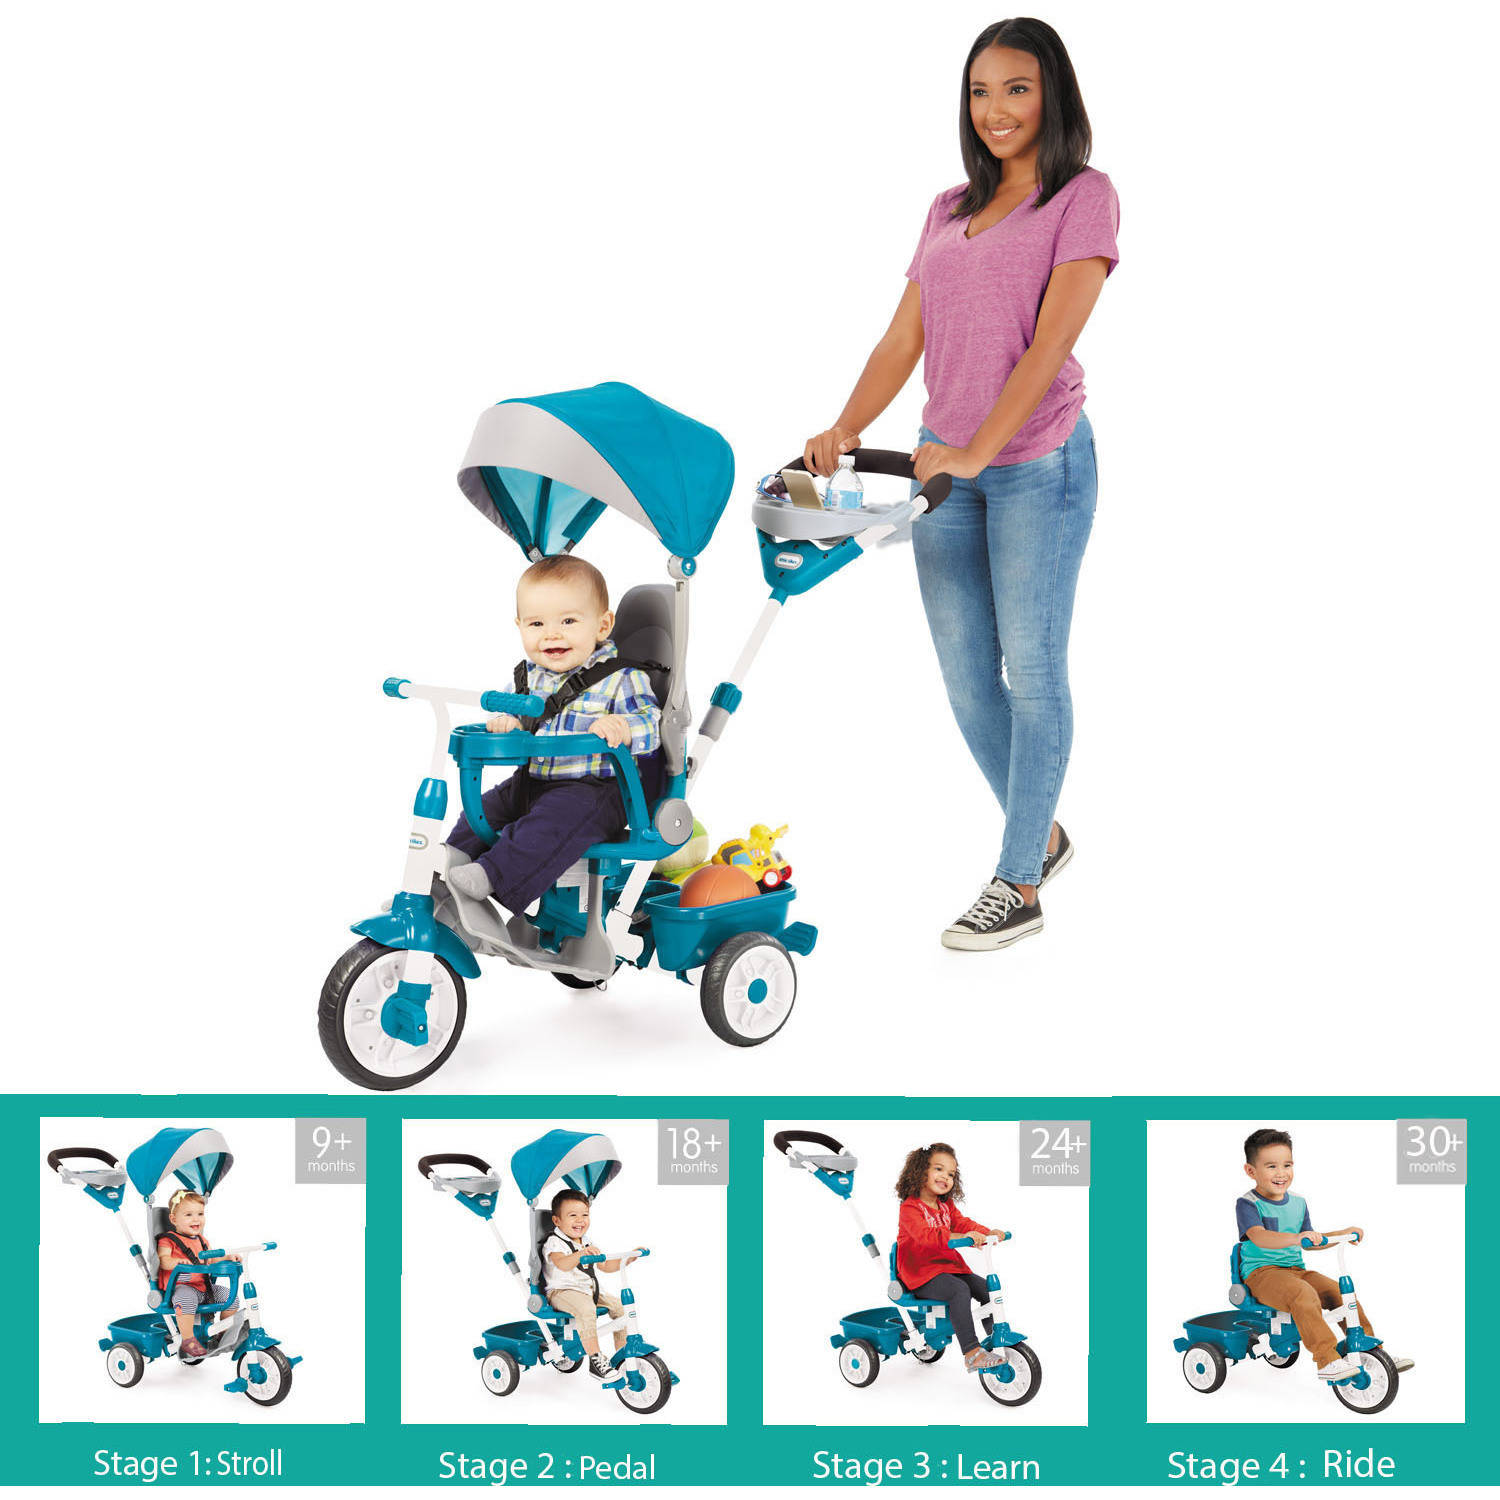 Little Tikes Perfect Fit 4-in-1 Trike in Teal, Convertible Tricycle for Toddlers, 4 Stages of Growth & Shade Canopy - Kids Boys Girls Ages 9 Months to 3 Years Old - image 5 of 13